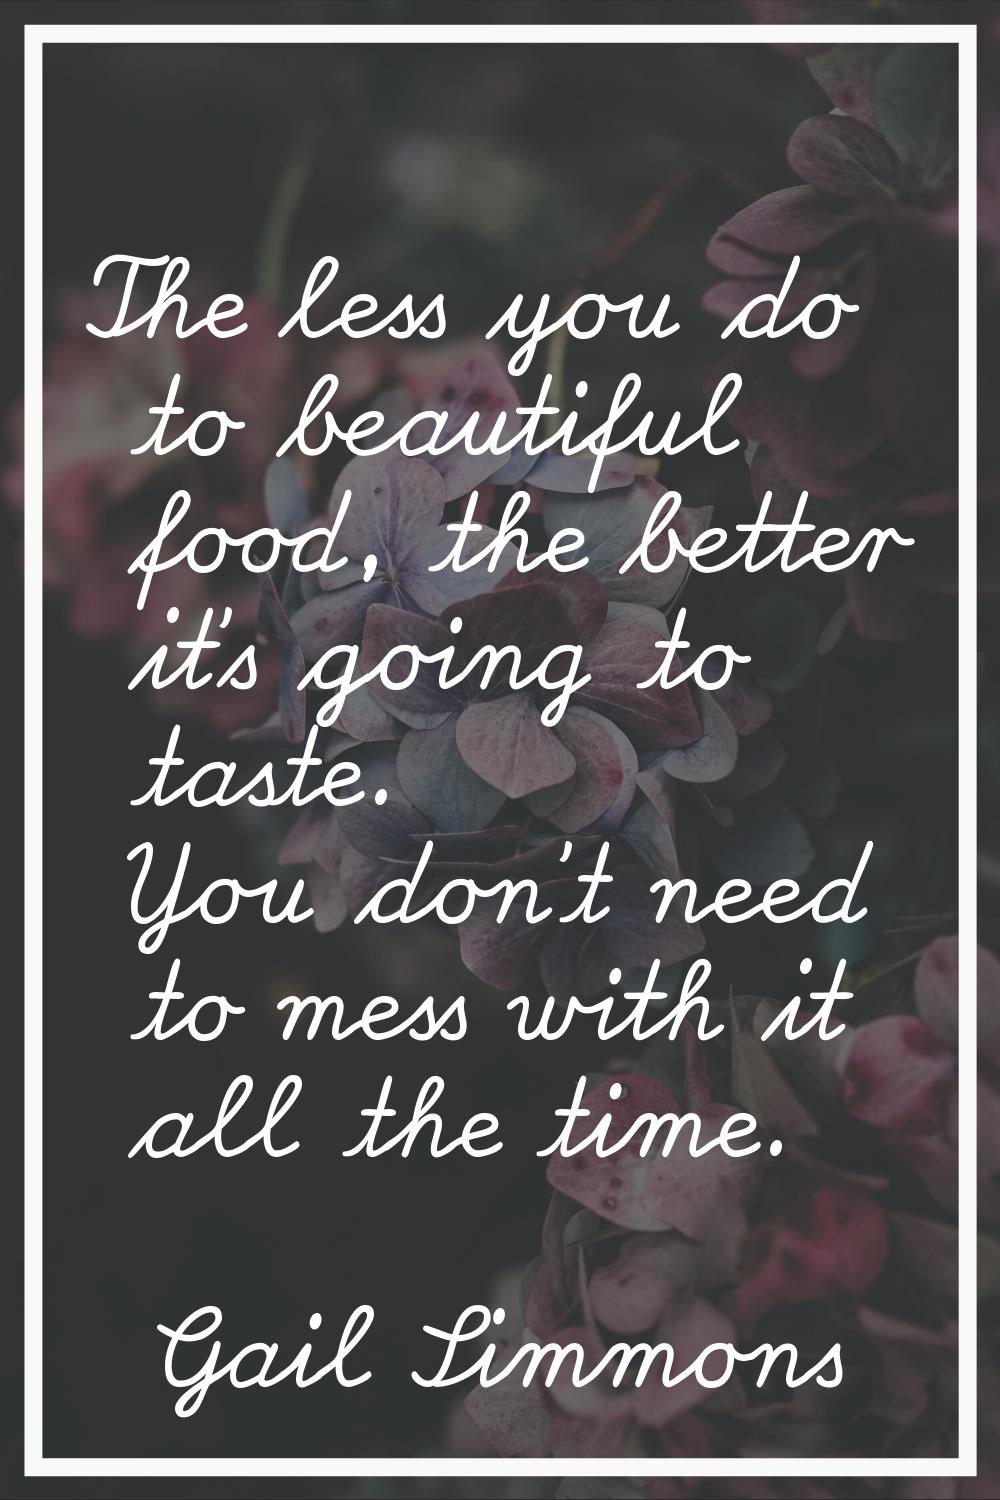 The less you do to beautiful food, the better it's going to taste. You don't need to mess with it a